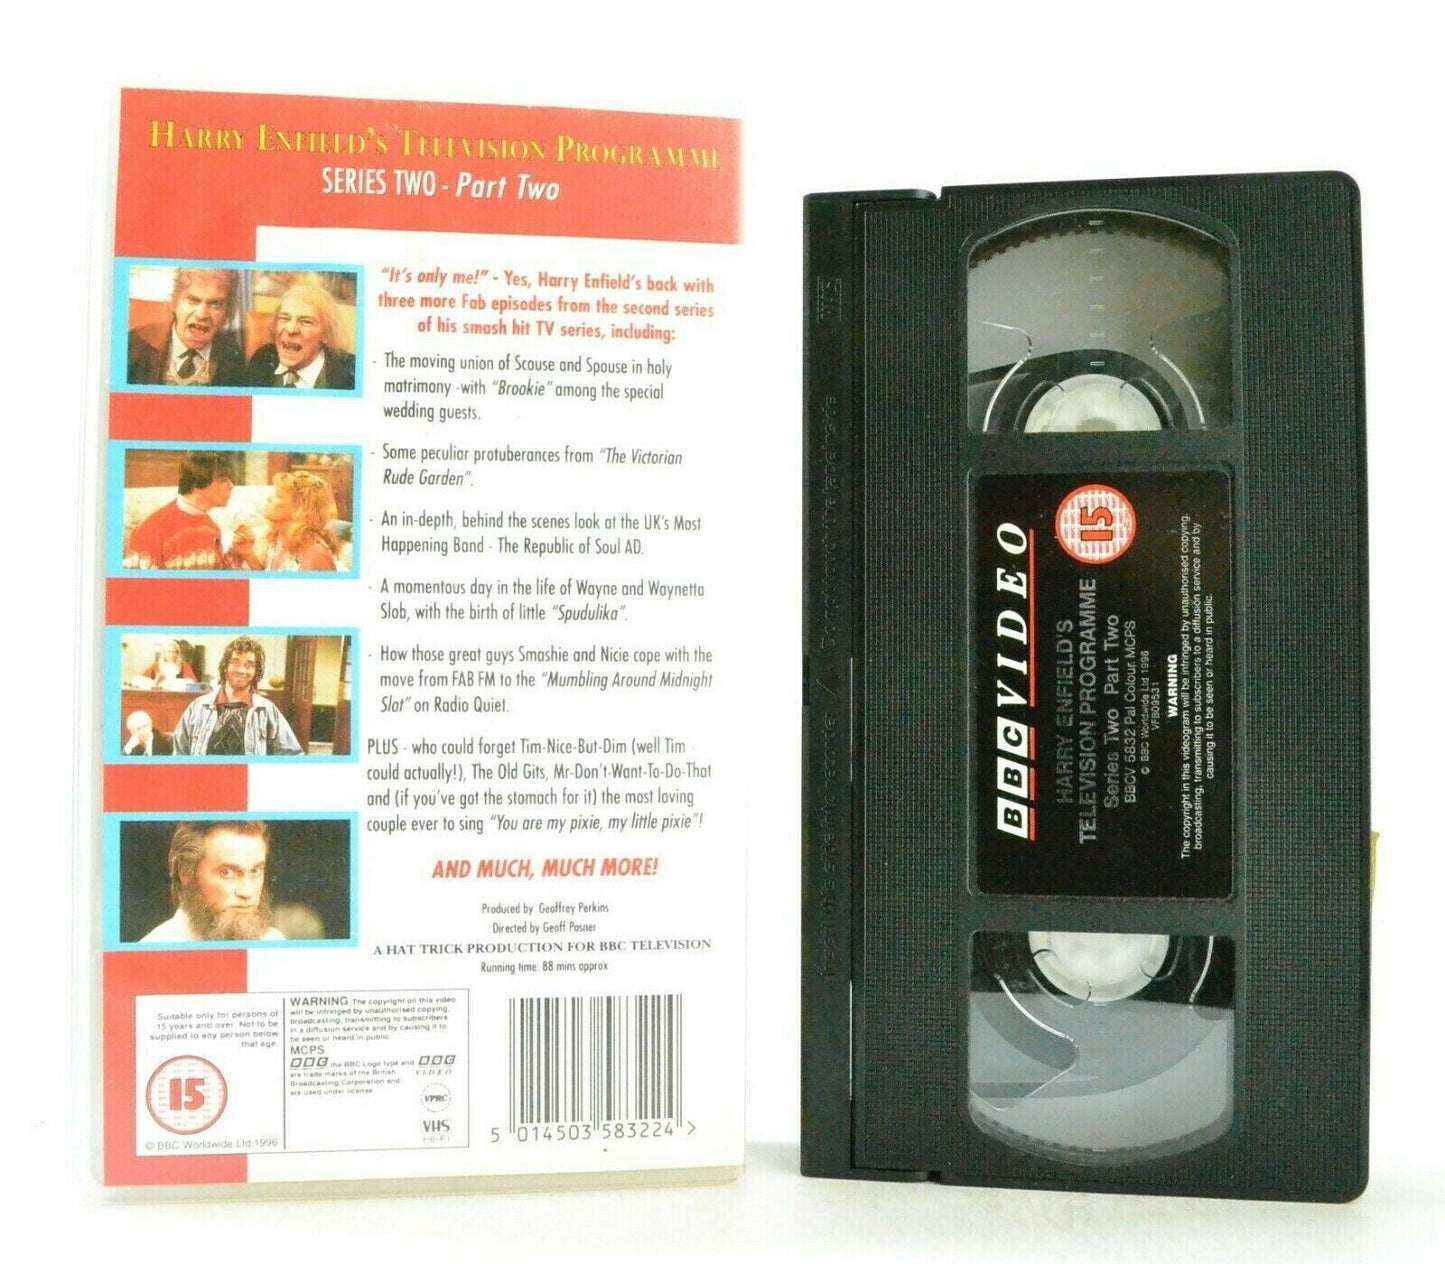 Harry Enfield: Television Programme, Series 2/Part 2 - BBC Comedy (1996) - VHS-